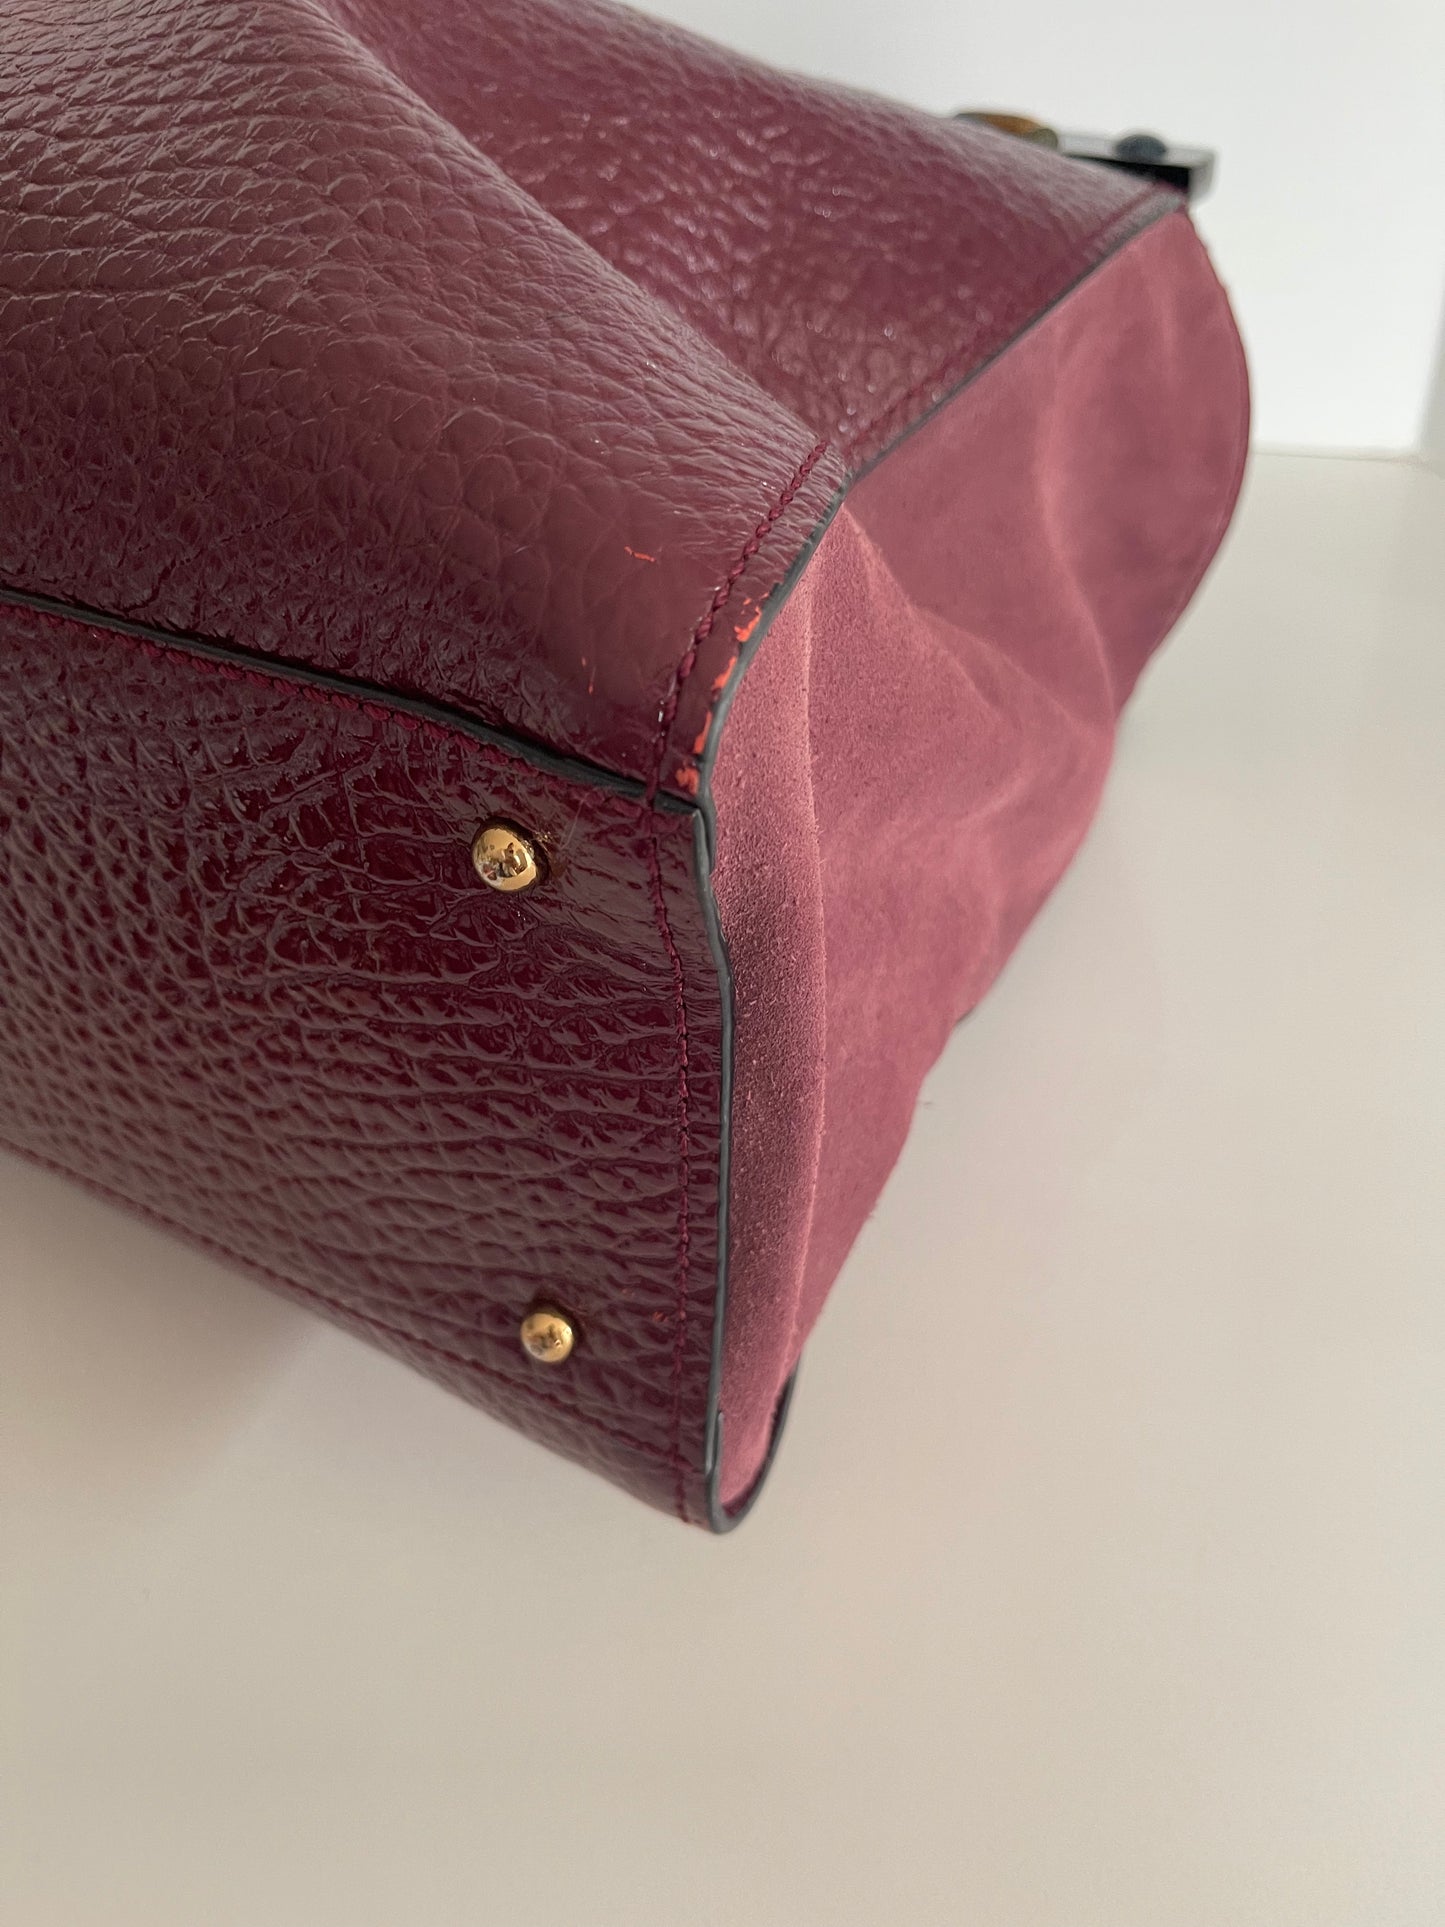 Tory Burch Maroon Large Leather Tote